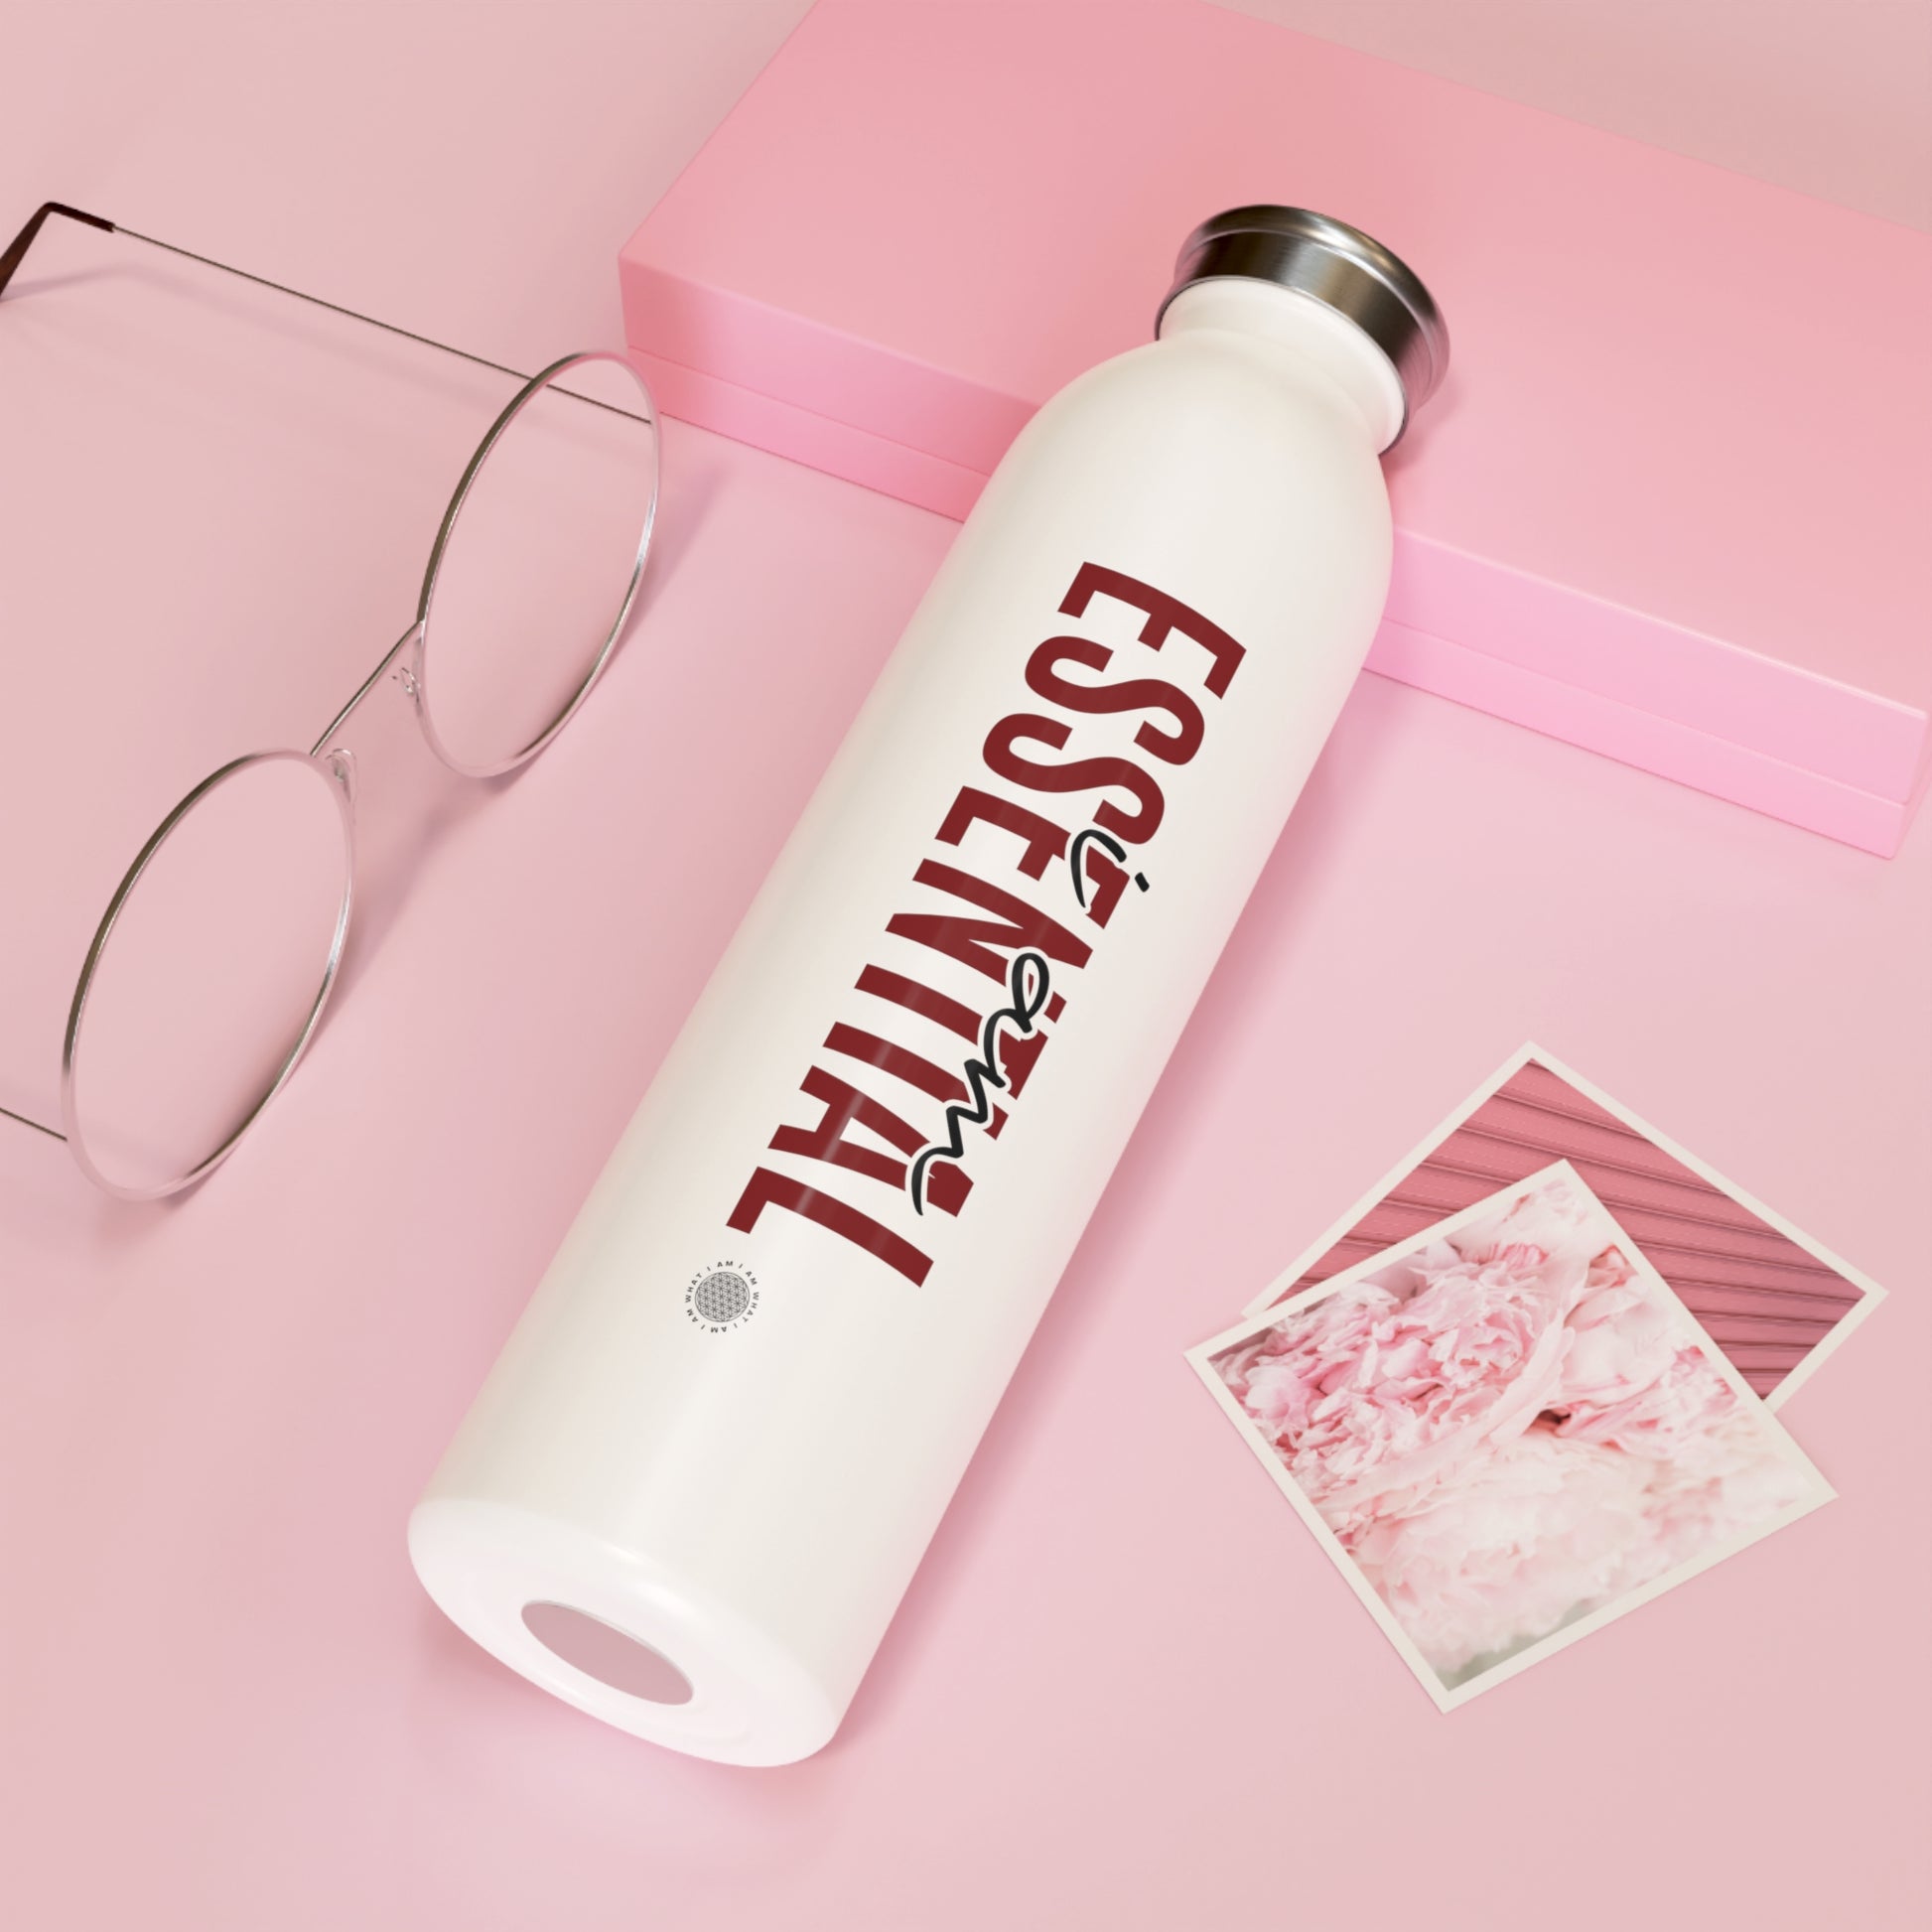 Our I Am Essential affirmation water bottle is one of our positive affirmations for mental health. Positive thinking keeps our mindset happy and healthy. This personalized water bottle was designed to become a creator’s favorite canvas of expression.